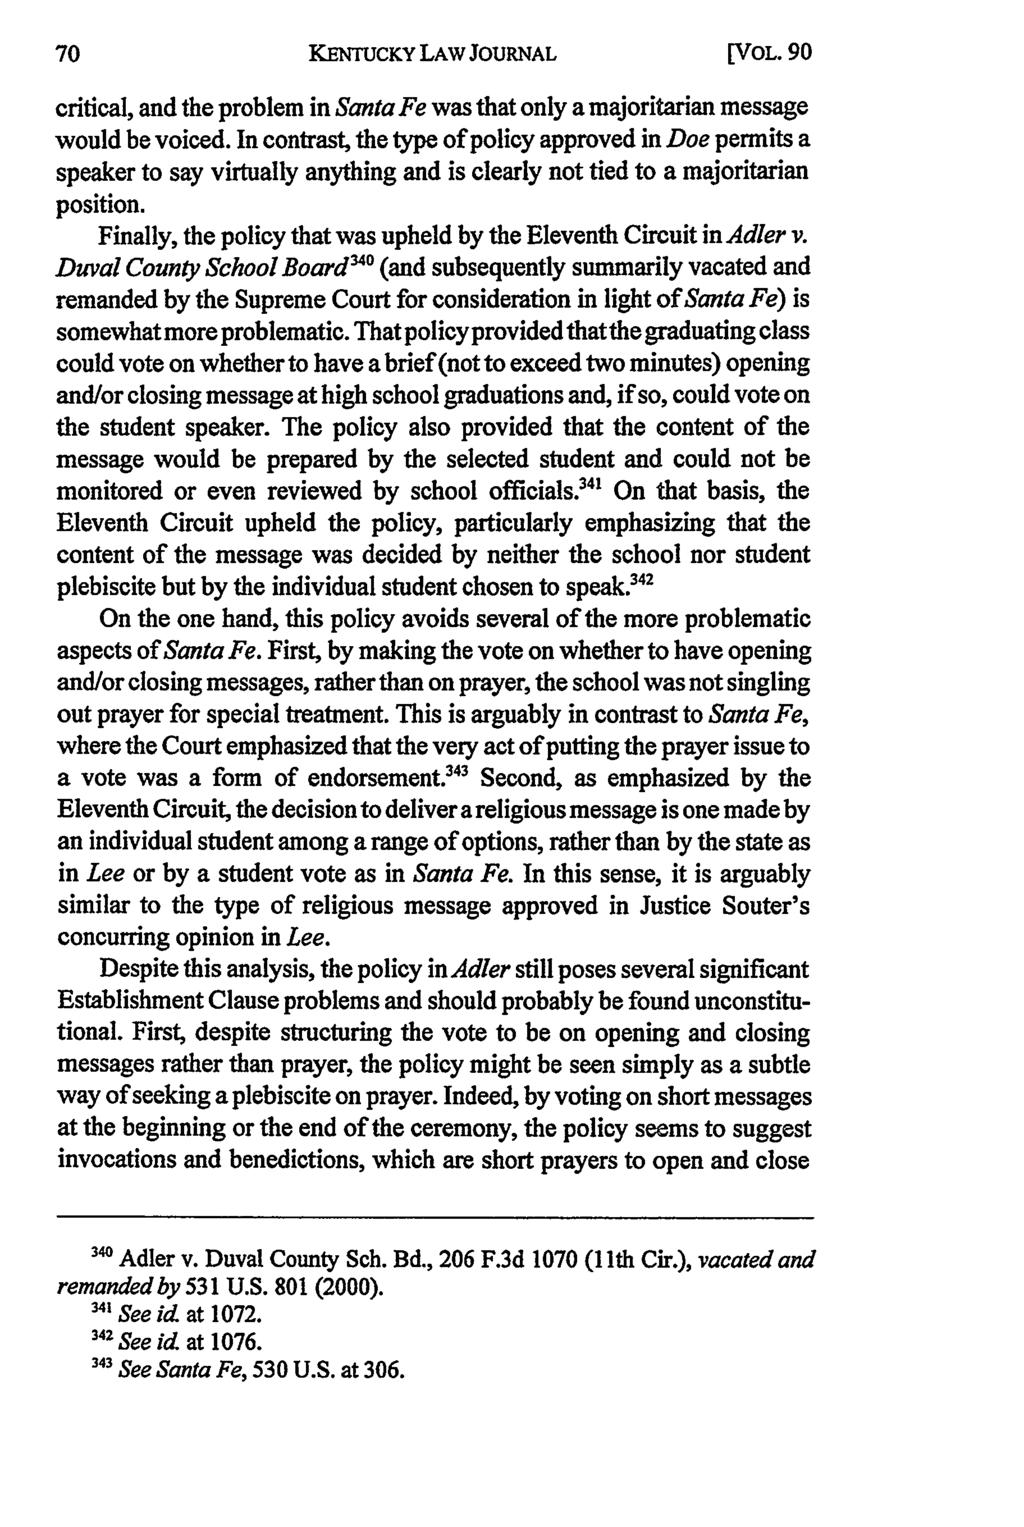 KENTUCKY LAW JOURNAL [VOL. 90 critical, and the problem in Santa Fe was that only a majoritarian message would be voiced.